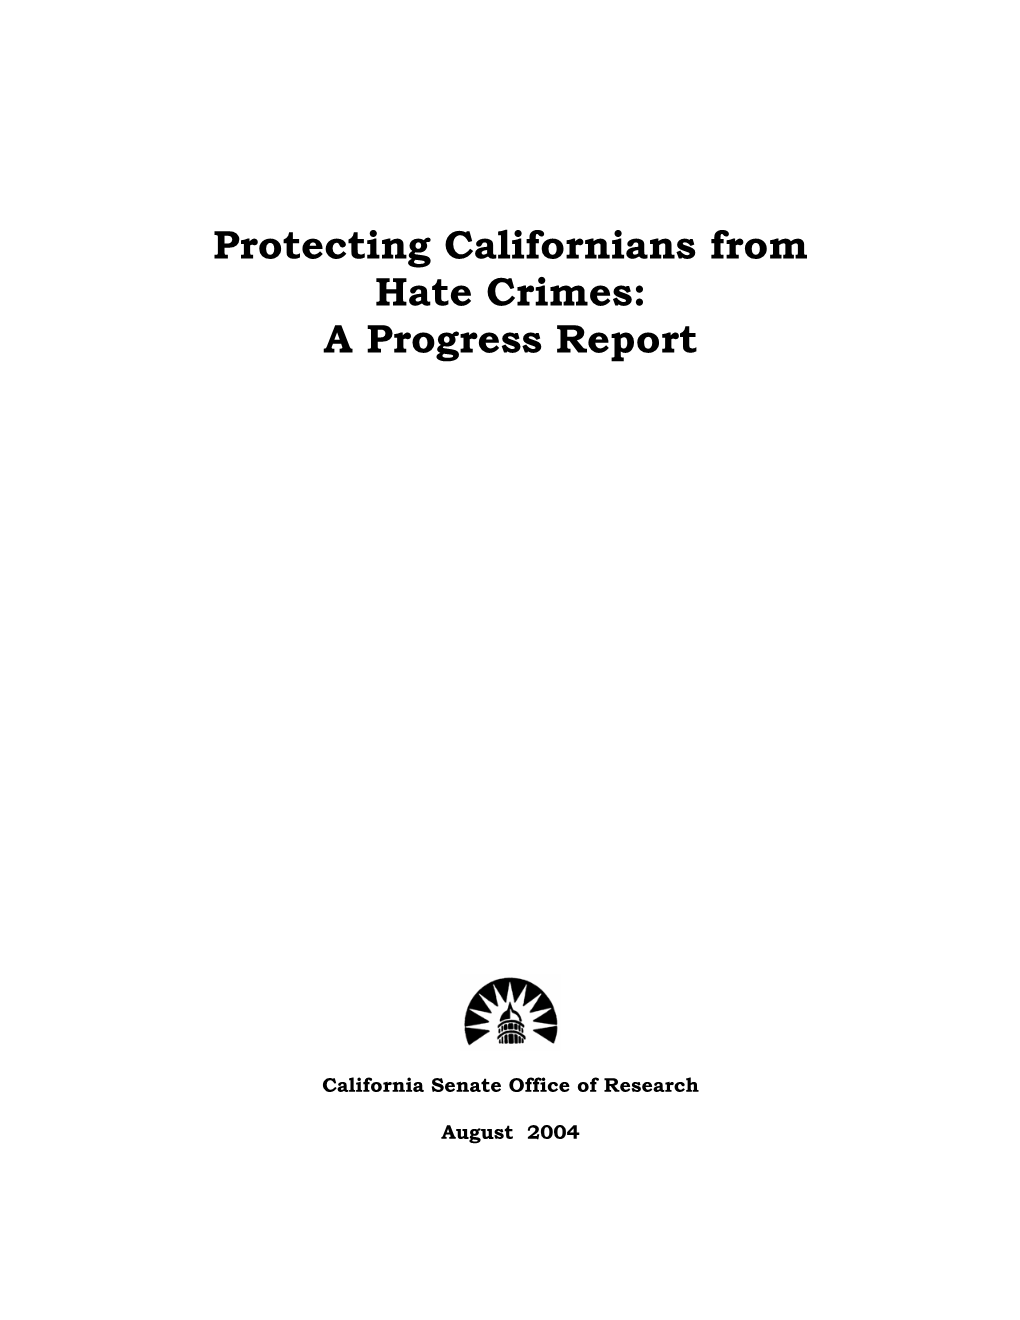 Protecting Californians from Hate Crimes: a Progress Report